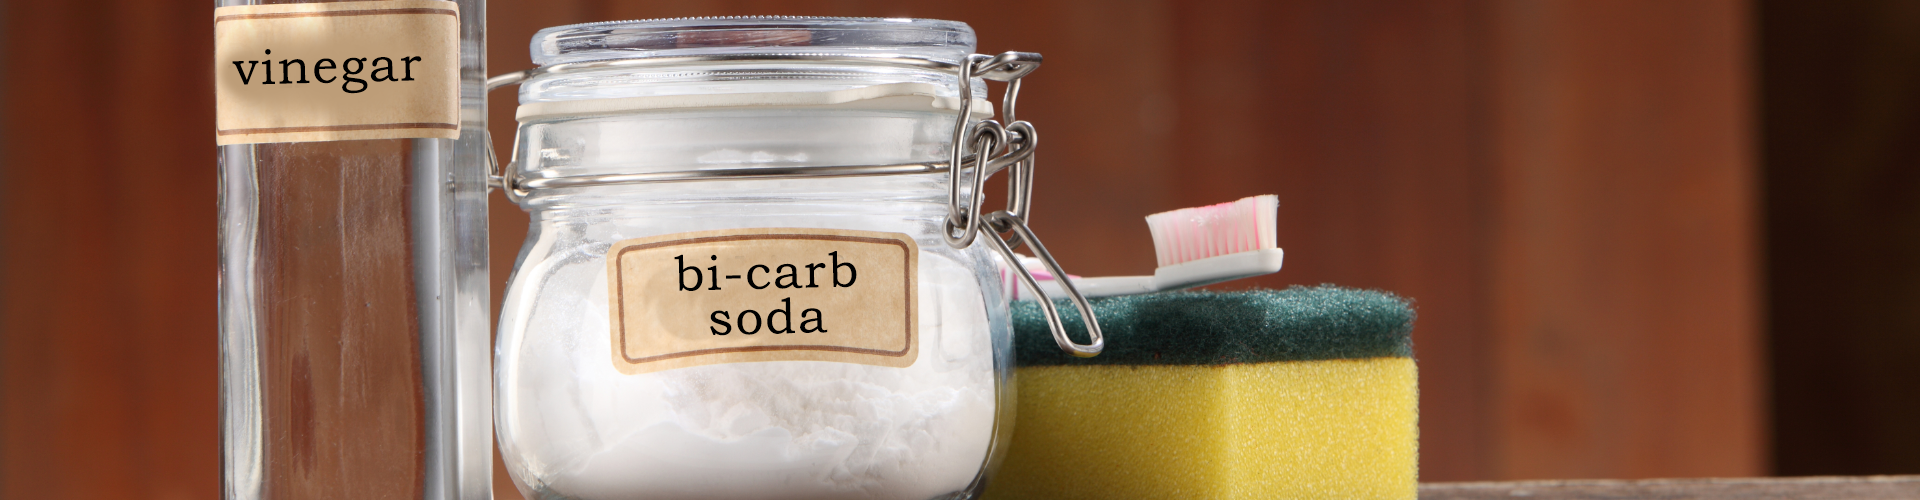 5 Brilliant Ways to Clean Your Home with Bi-Carb Soda